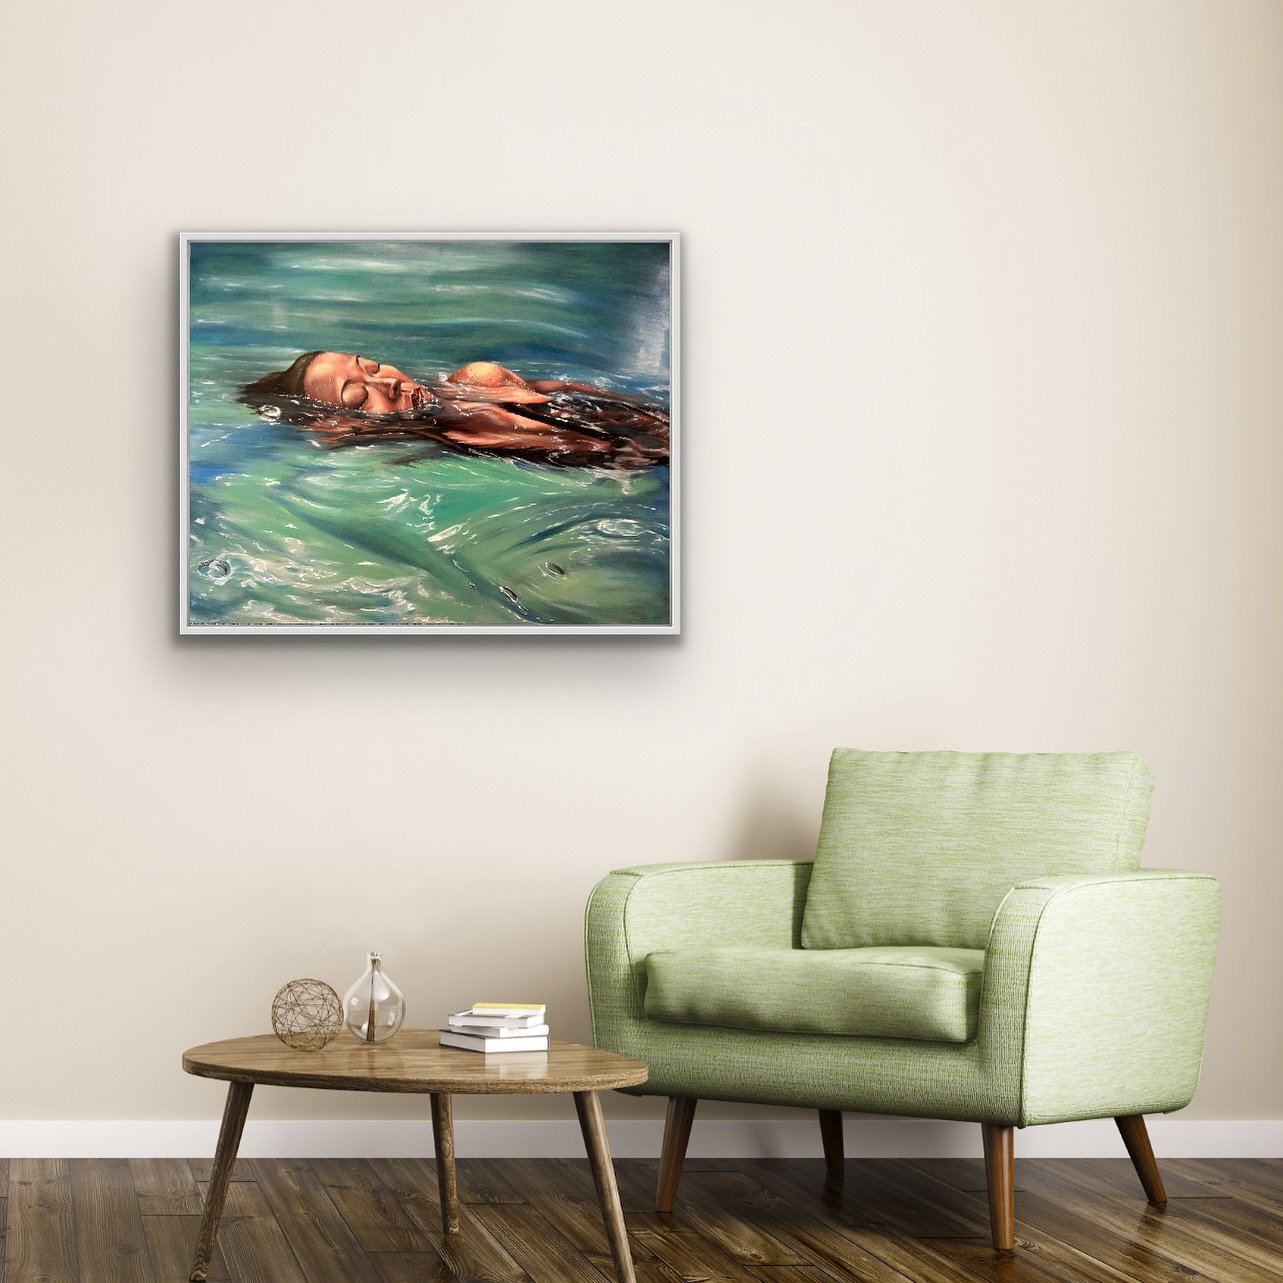 &ldquo;Adrift&rdquo; is such a calming painting. I love the feel of the gliding through the water at the details of the drips in the skin. 

Available DM for inquiries 

.
.
.
#water #swimming #oilpainting #figurativeart #artcollector #artinsitu #liv